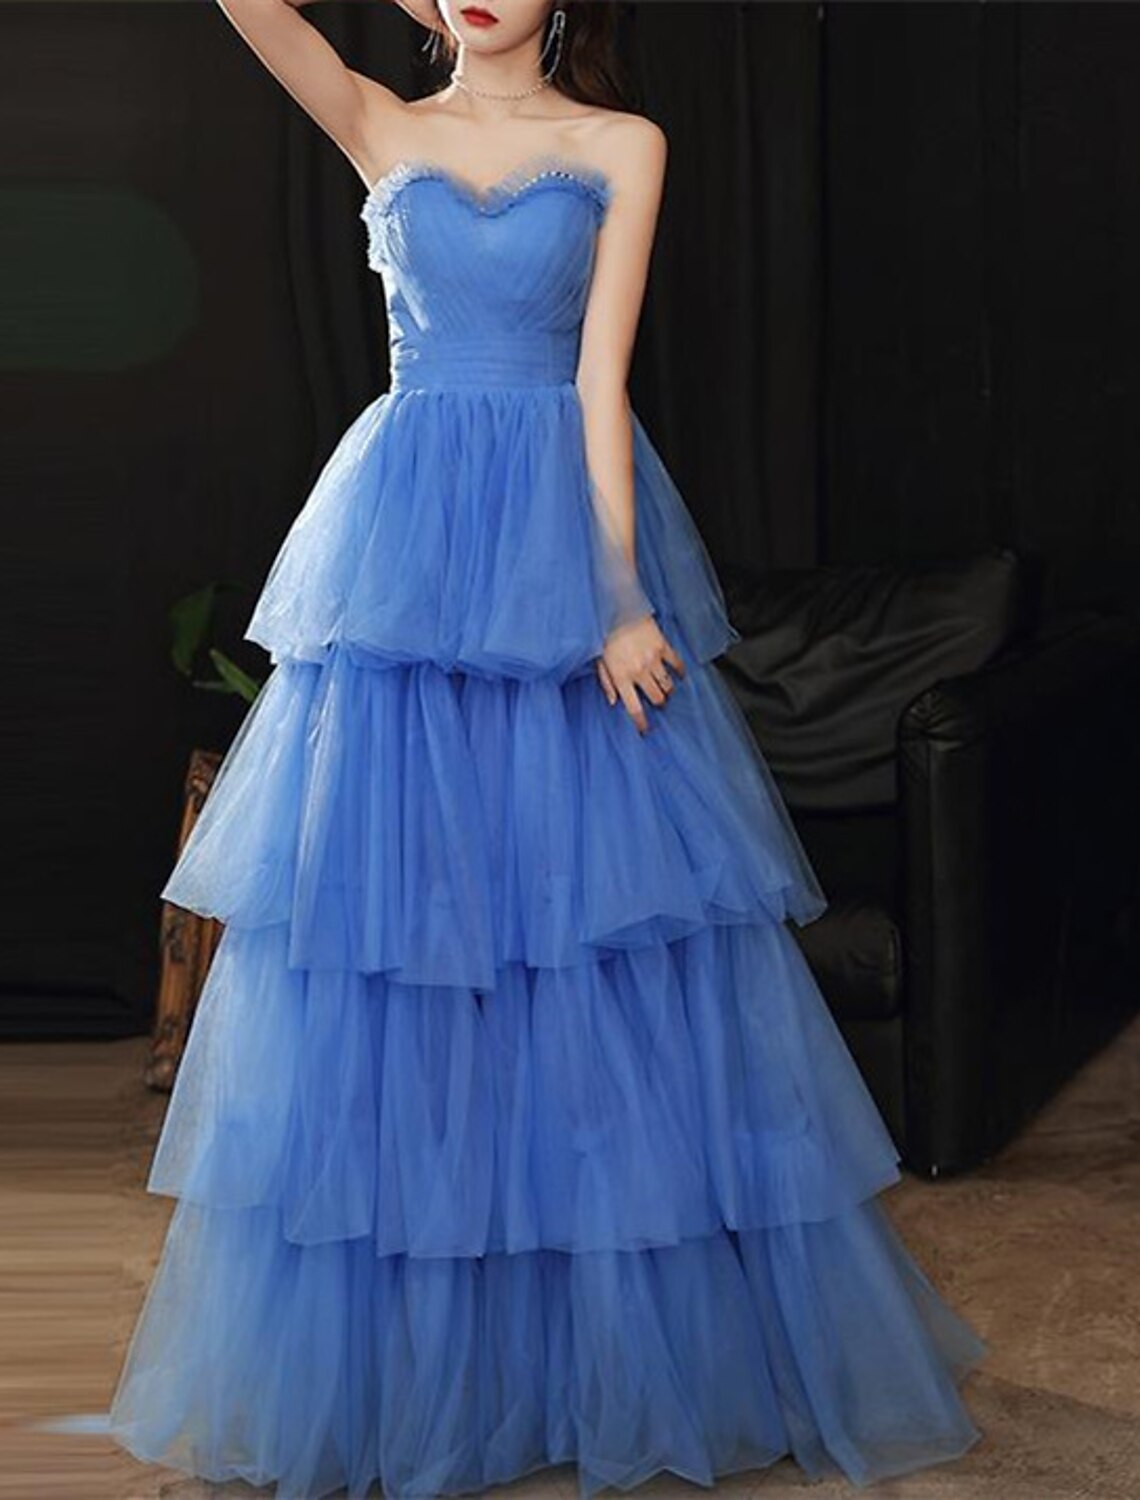 Ball Gown Prom Dresses Maxi Dress Party Wear Wedding Party Floor Length Sleeveless Strapless Polyester with Glitter